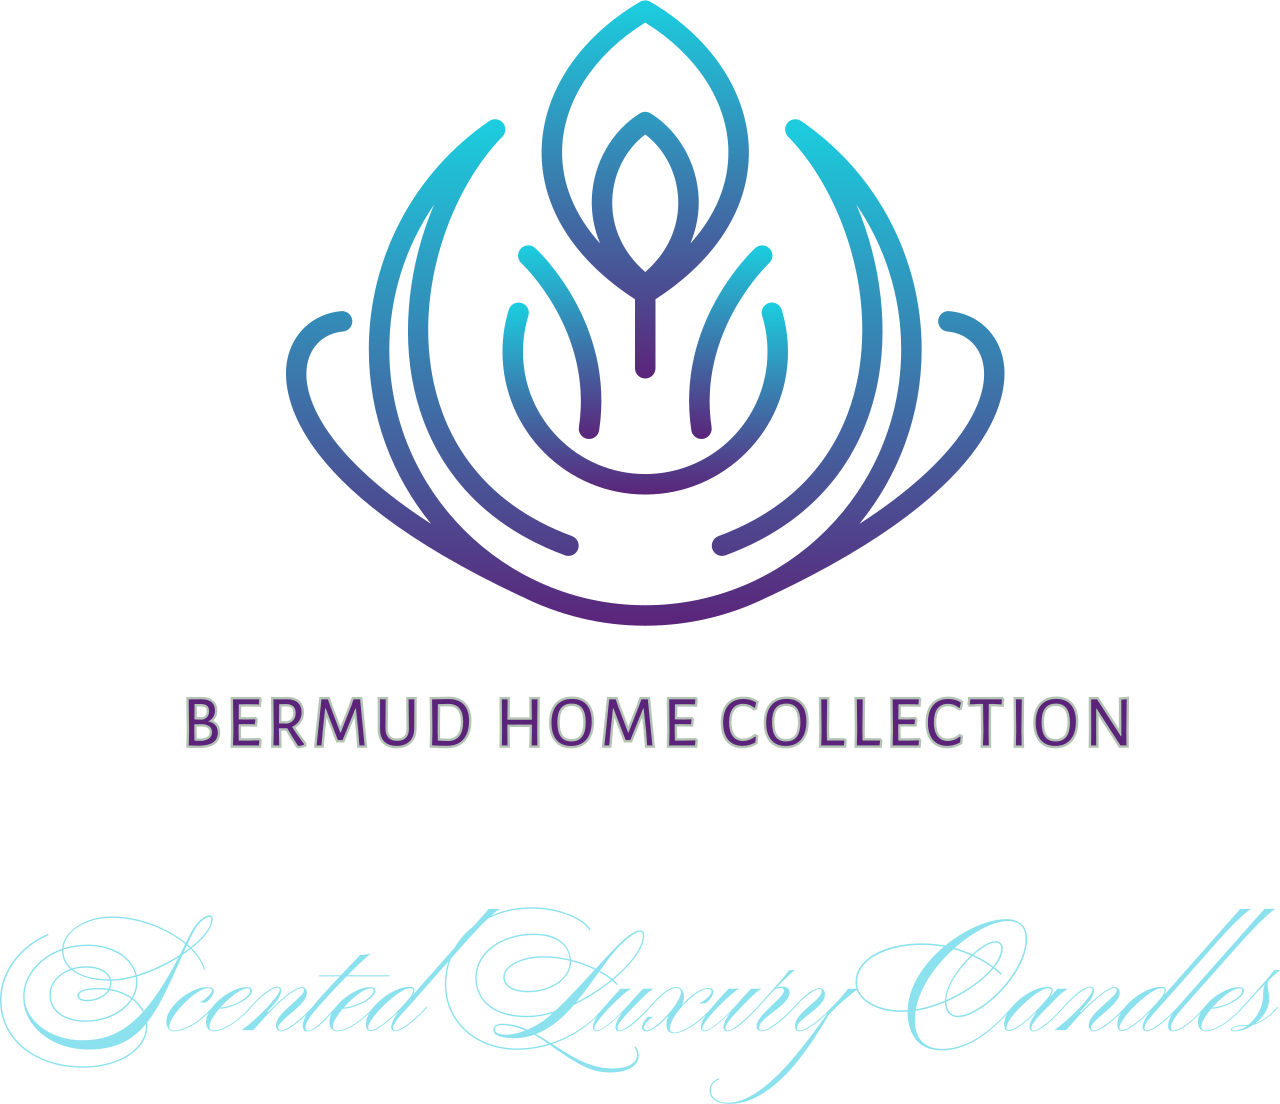 BERMUD HOME COLLECTION 's web page